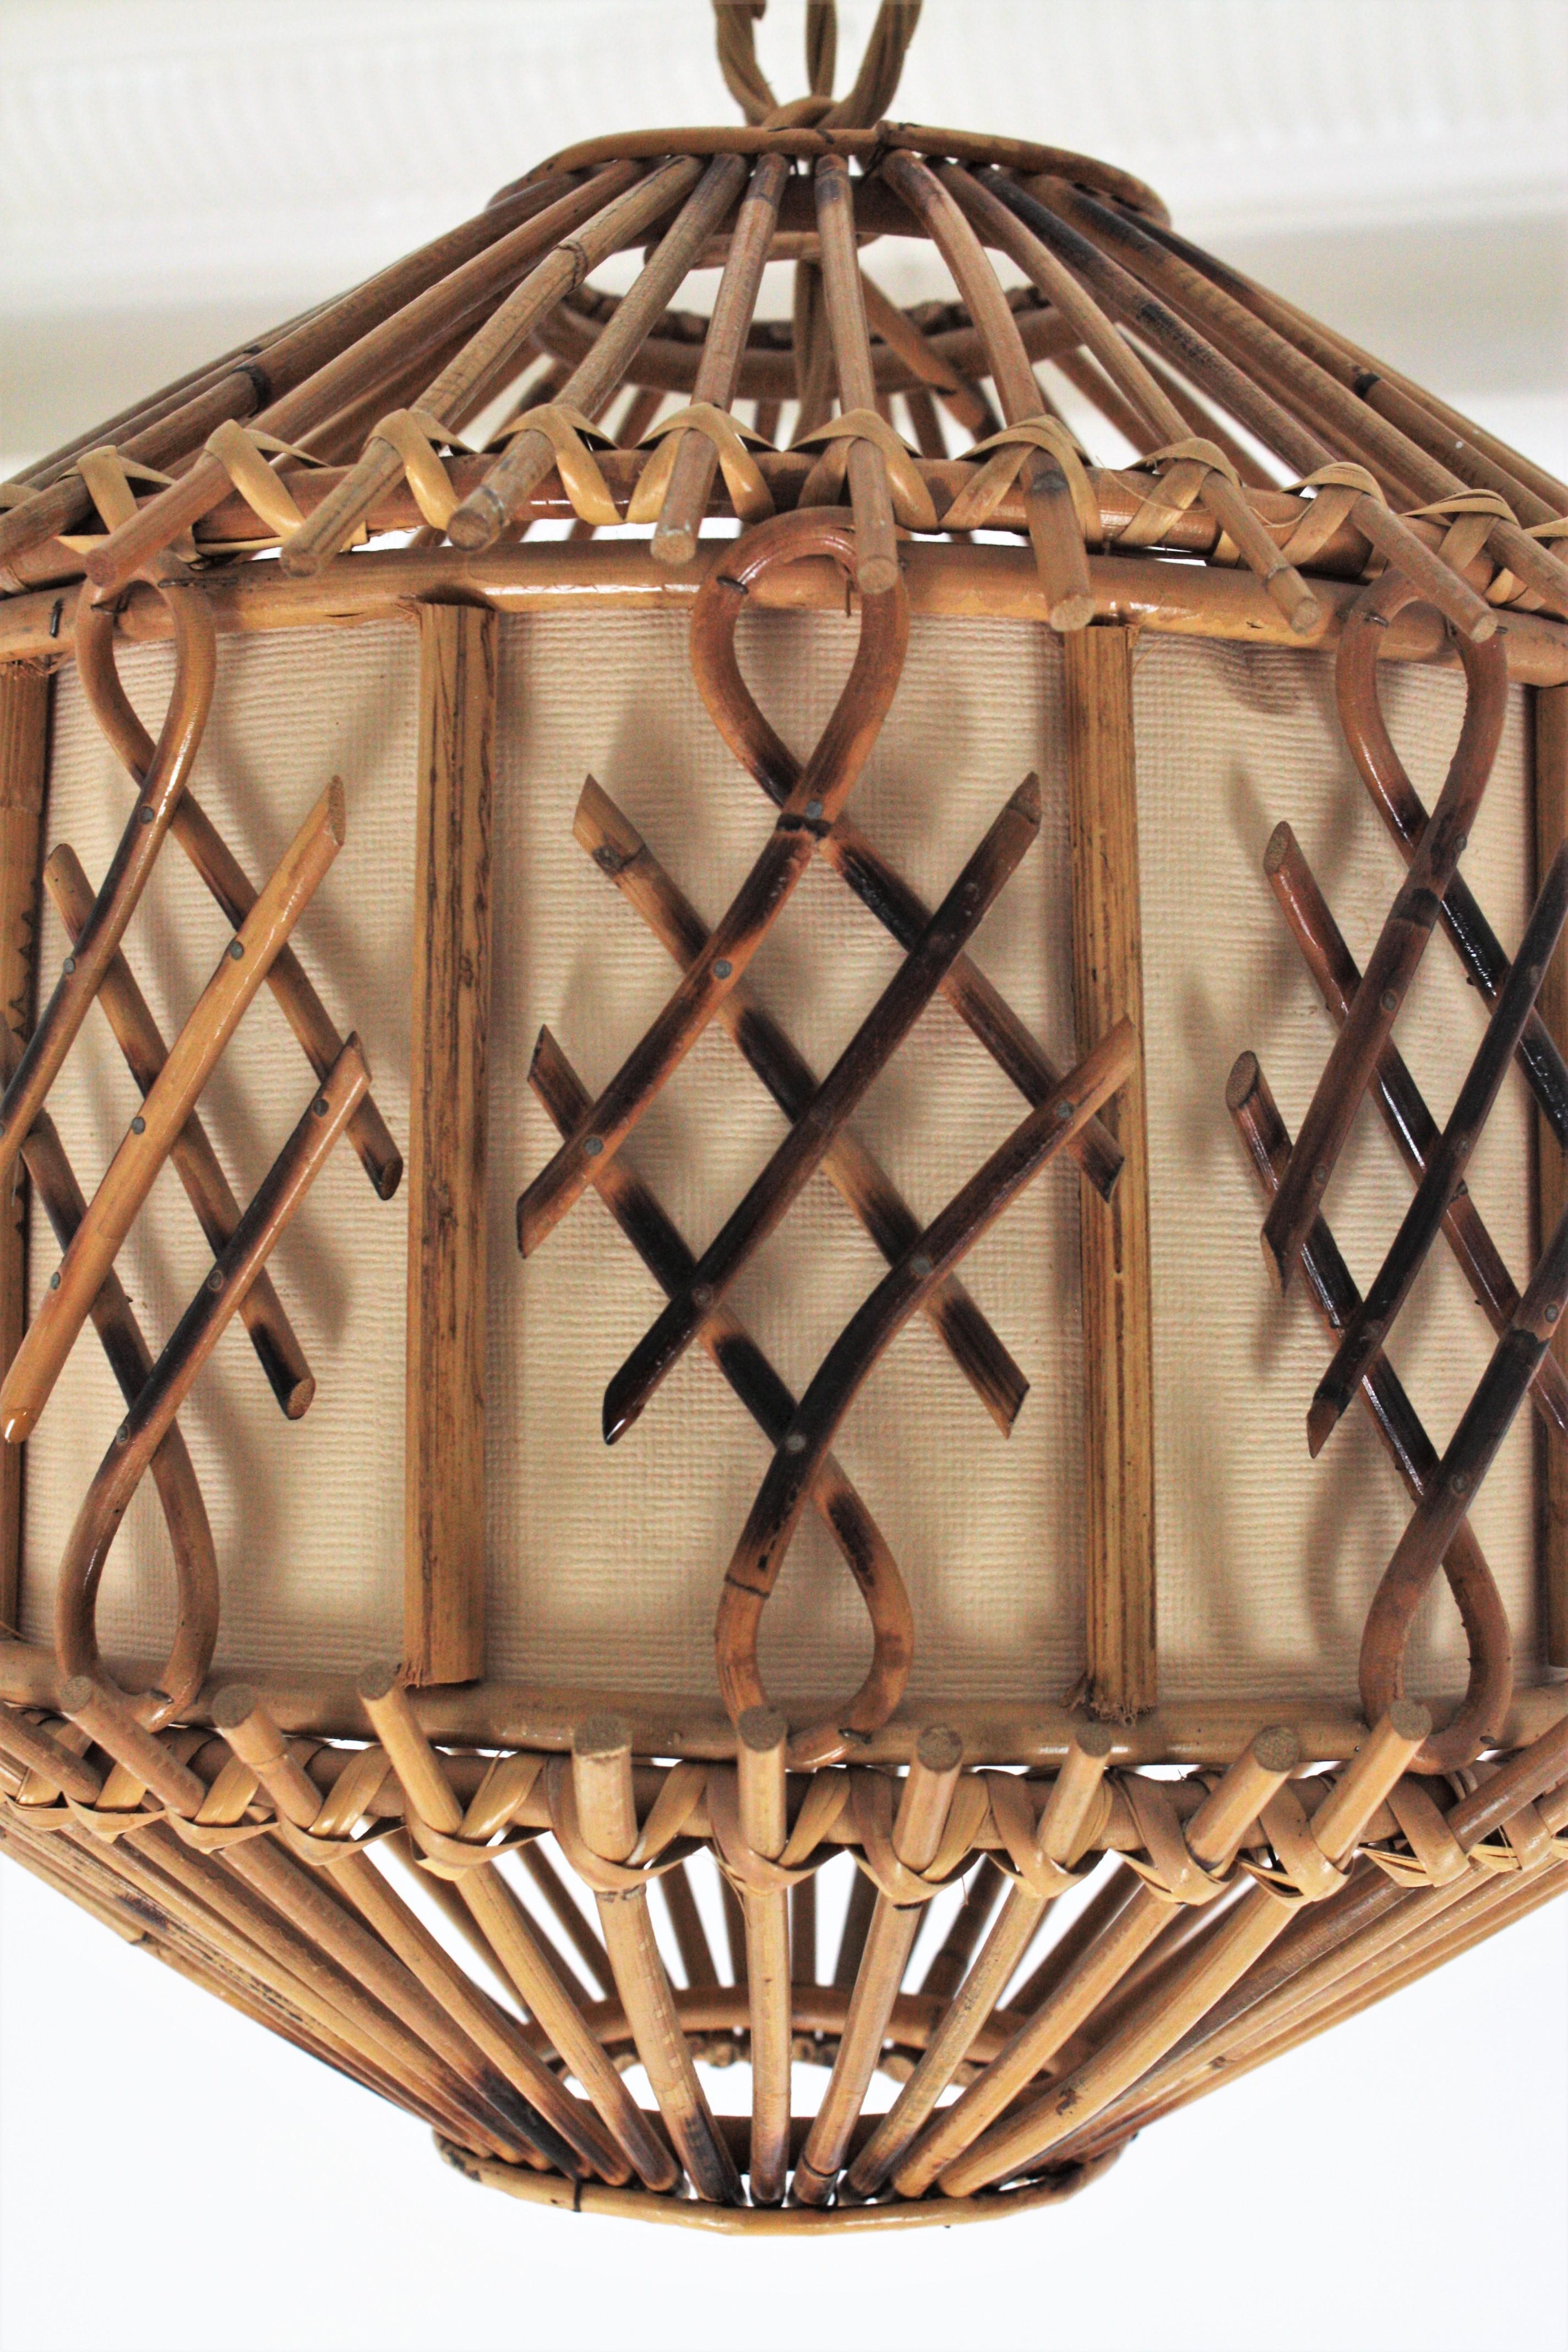 Hand-Crafted French Modernist Rattan Pendant Lantern / Hanging Light with Chinoiserie Accents